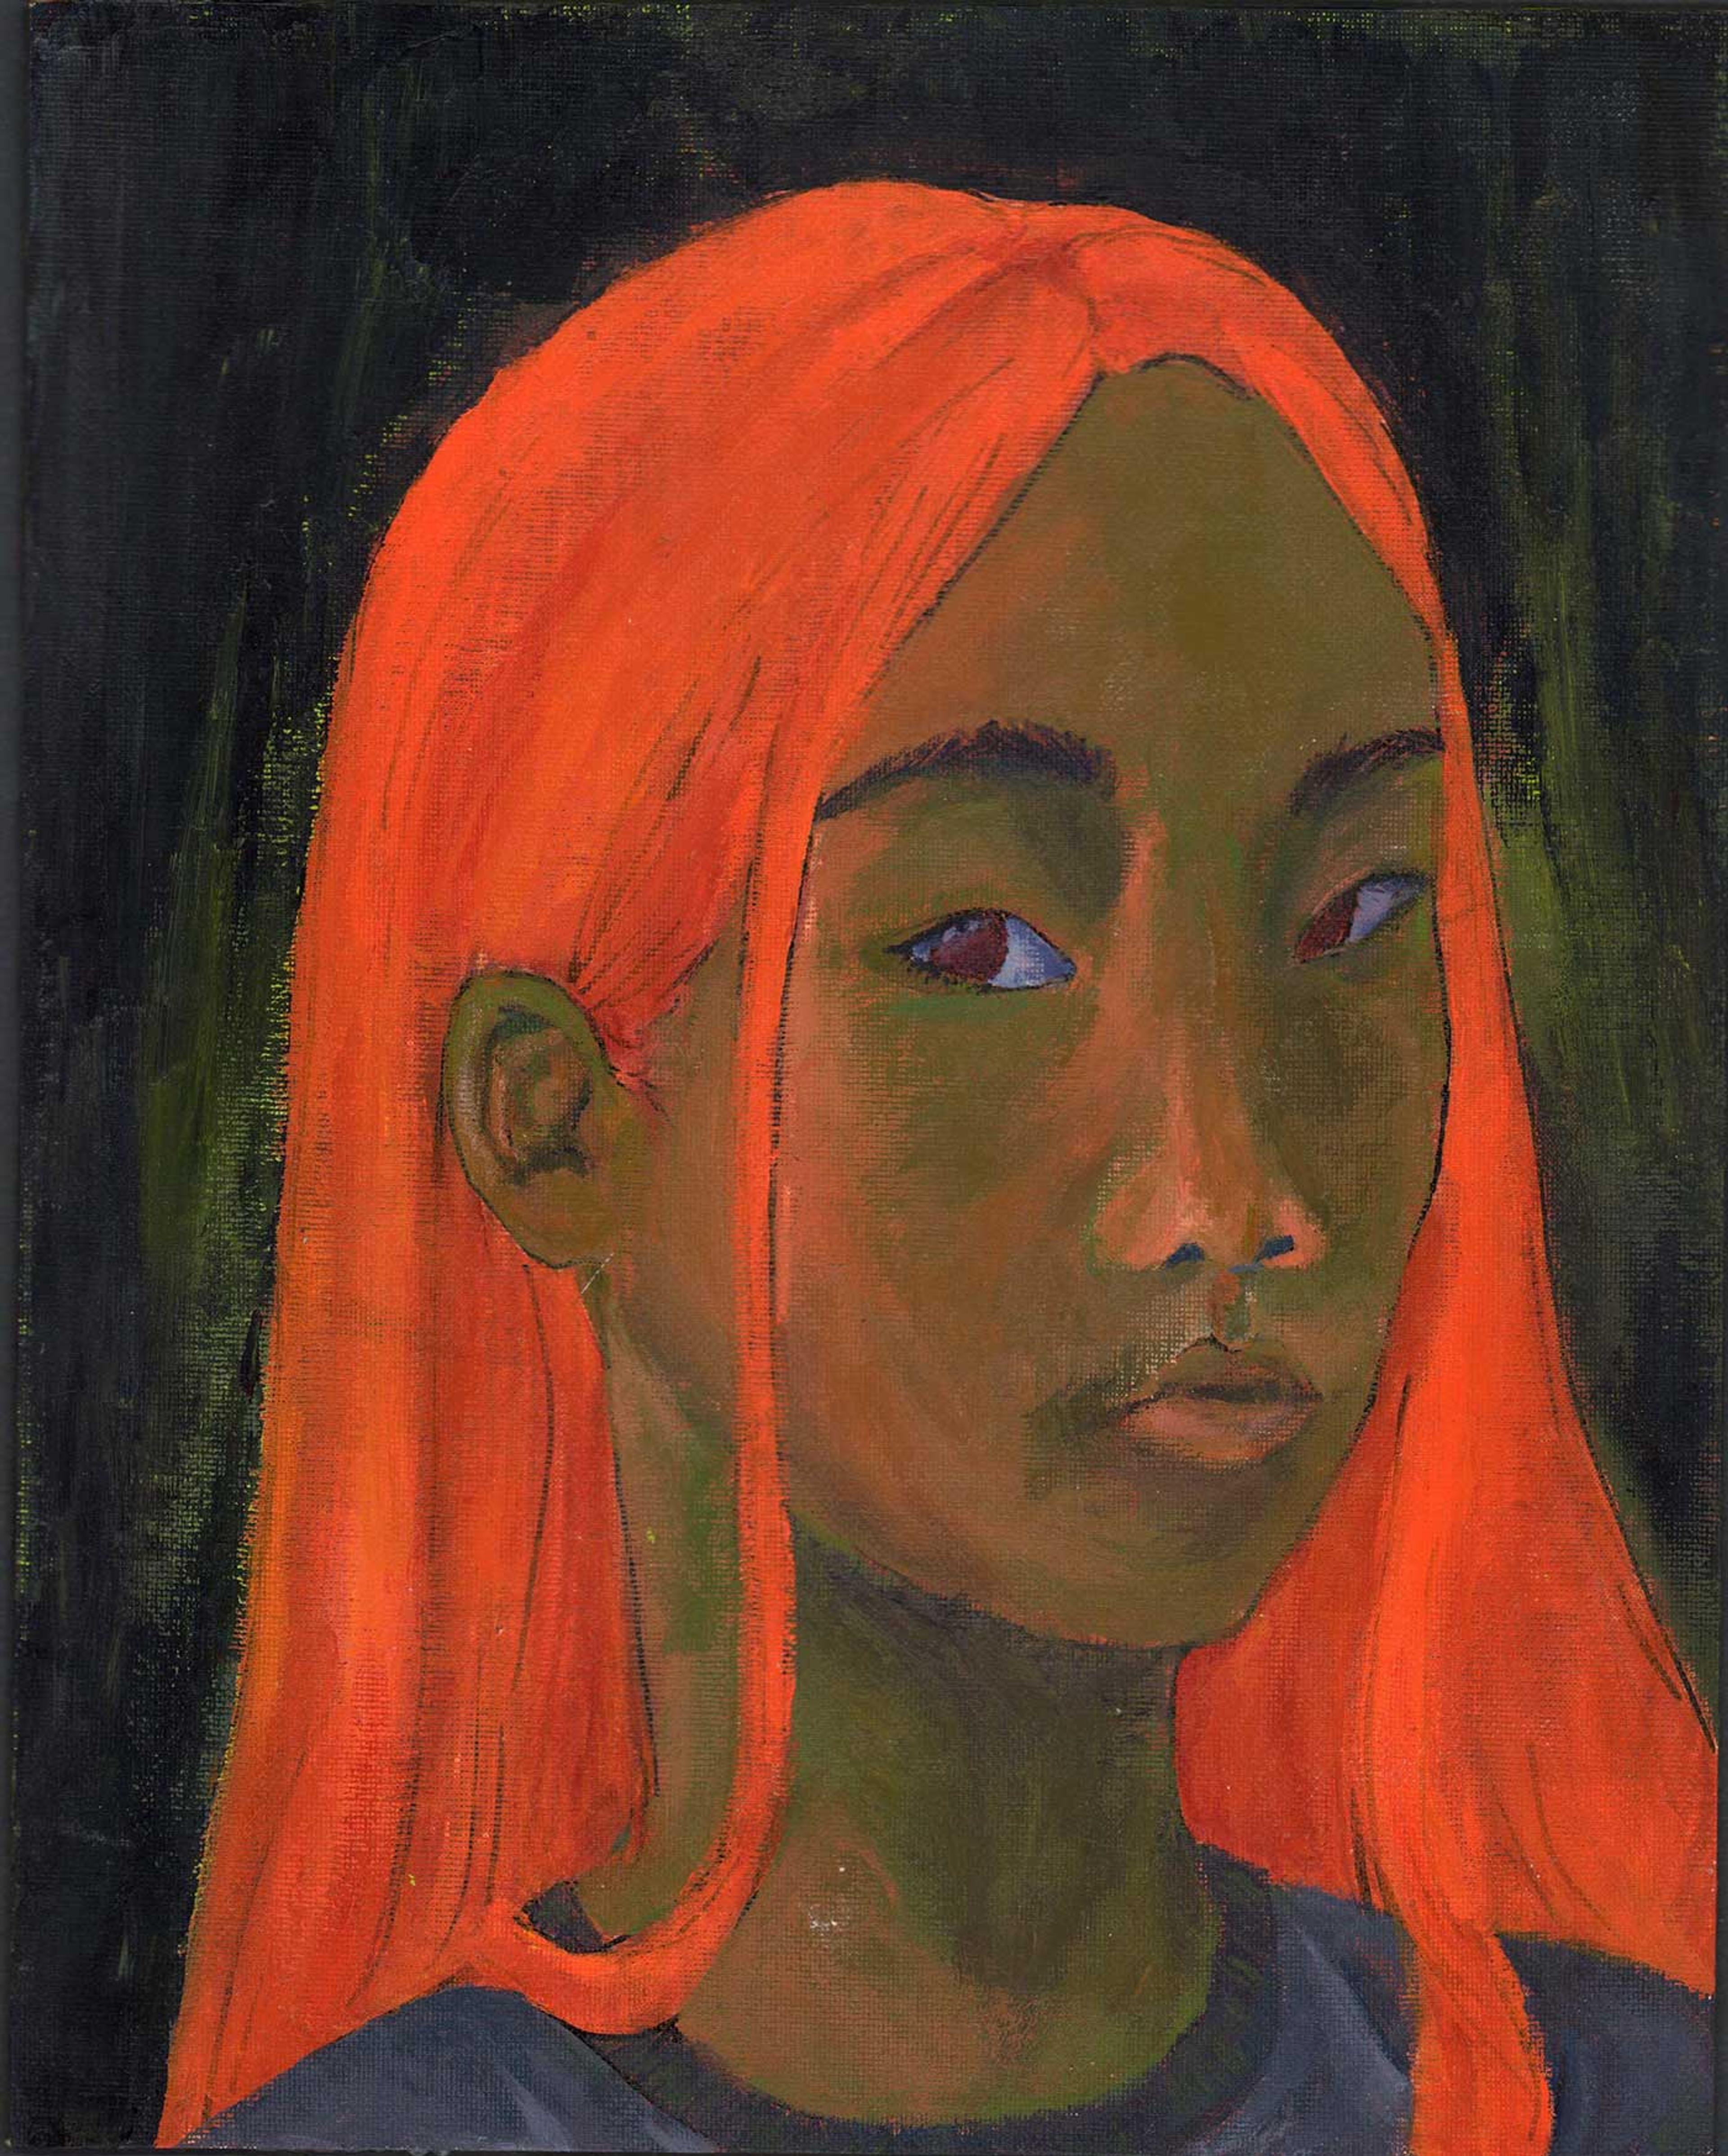 Painting of a young girl with orange hair.